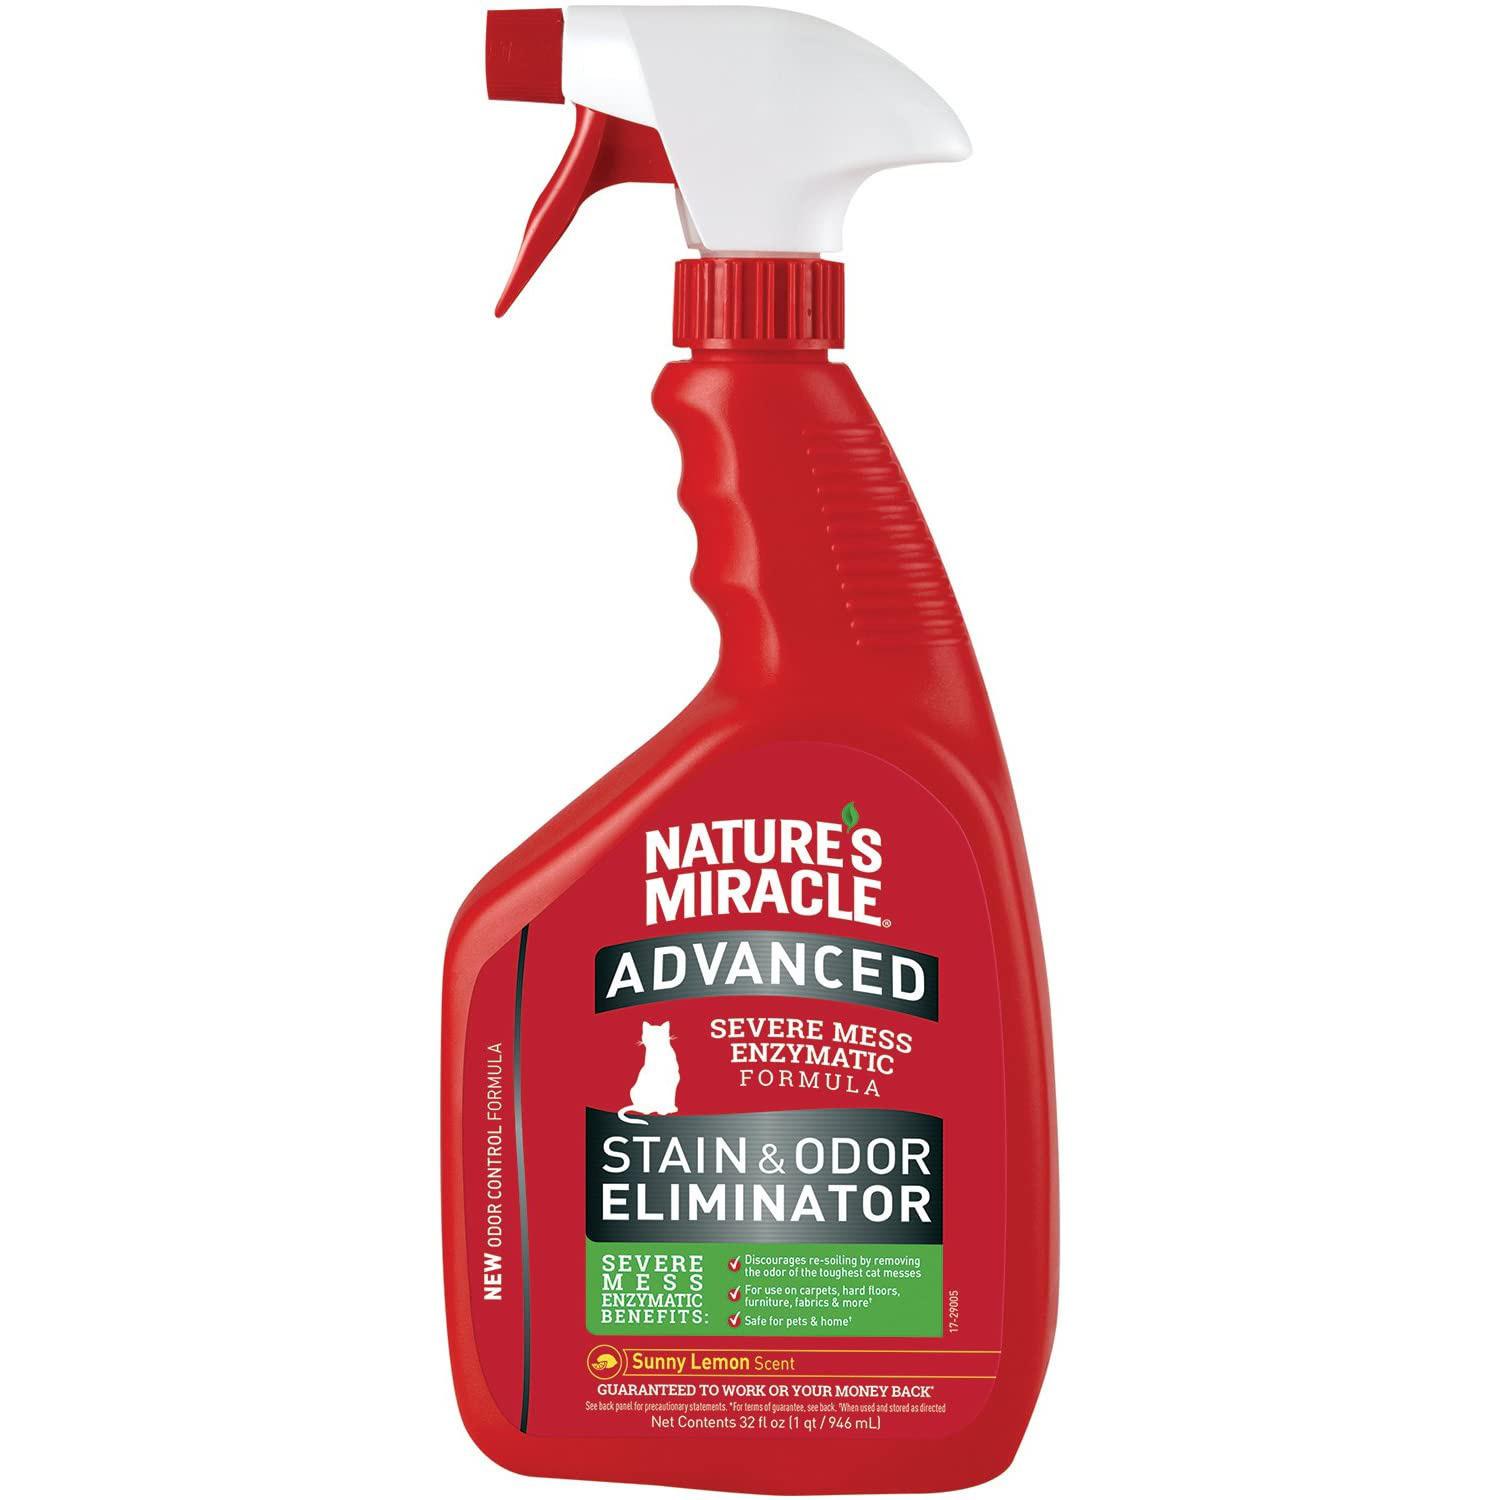 Natures Miracle Advanced Just For Cats Stain Remover Spray for $4.79 Shipped